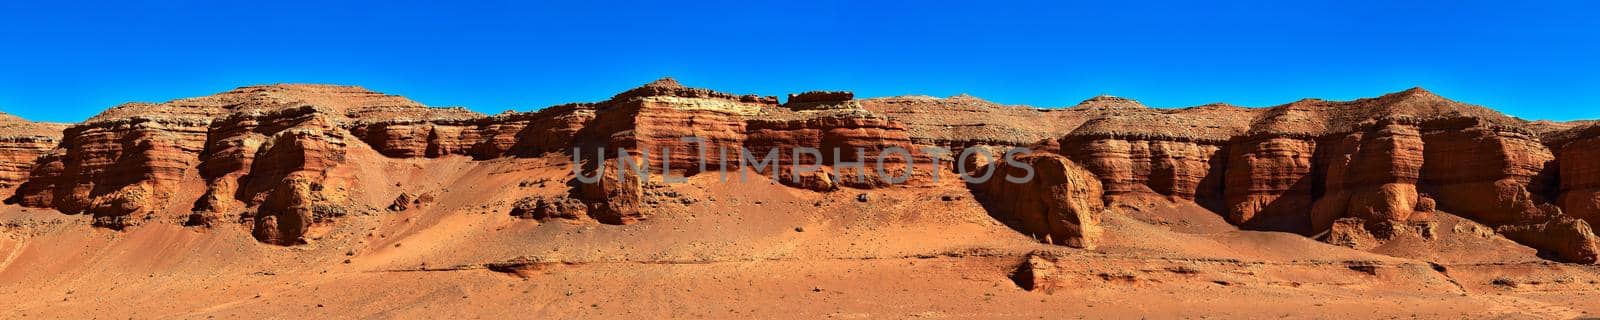 Herman Cav Canyon at sunset. South Gobi, Mongolia. Herman Tsav Canyon. Red Sandstone plateau, Martian landscape. The site of many paleontological finds. Cemetery of dinosaurs. by EvgeniyQW